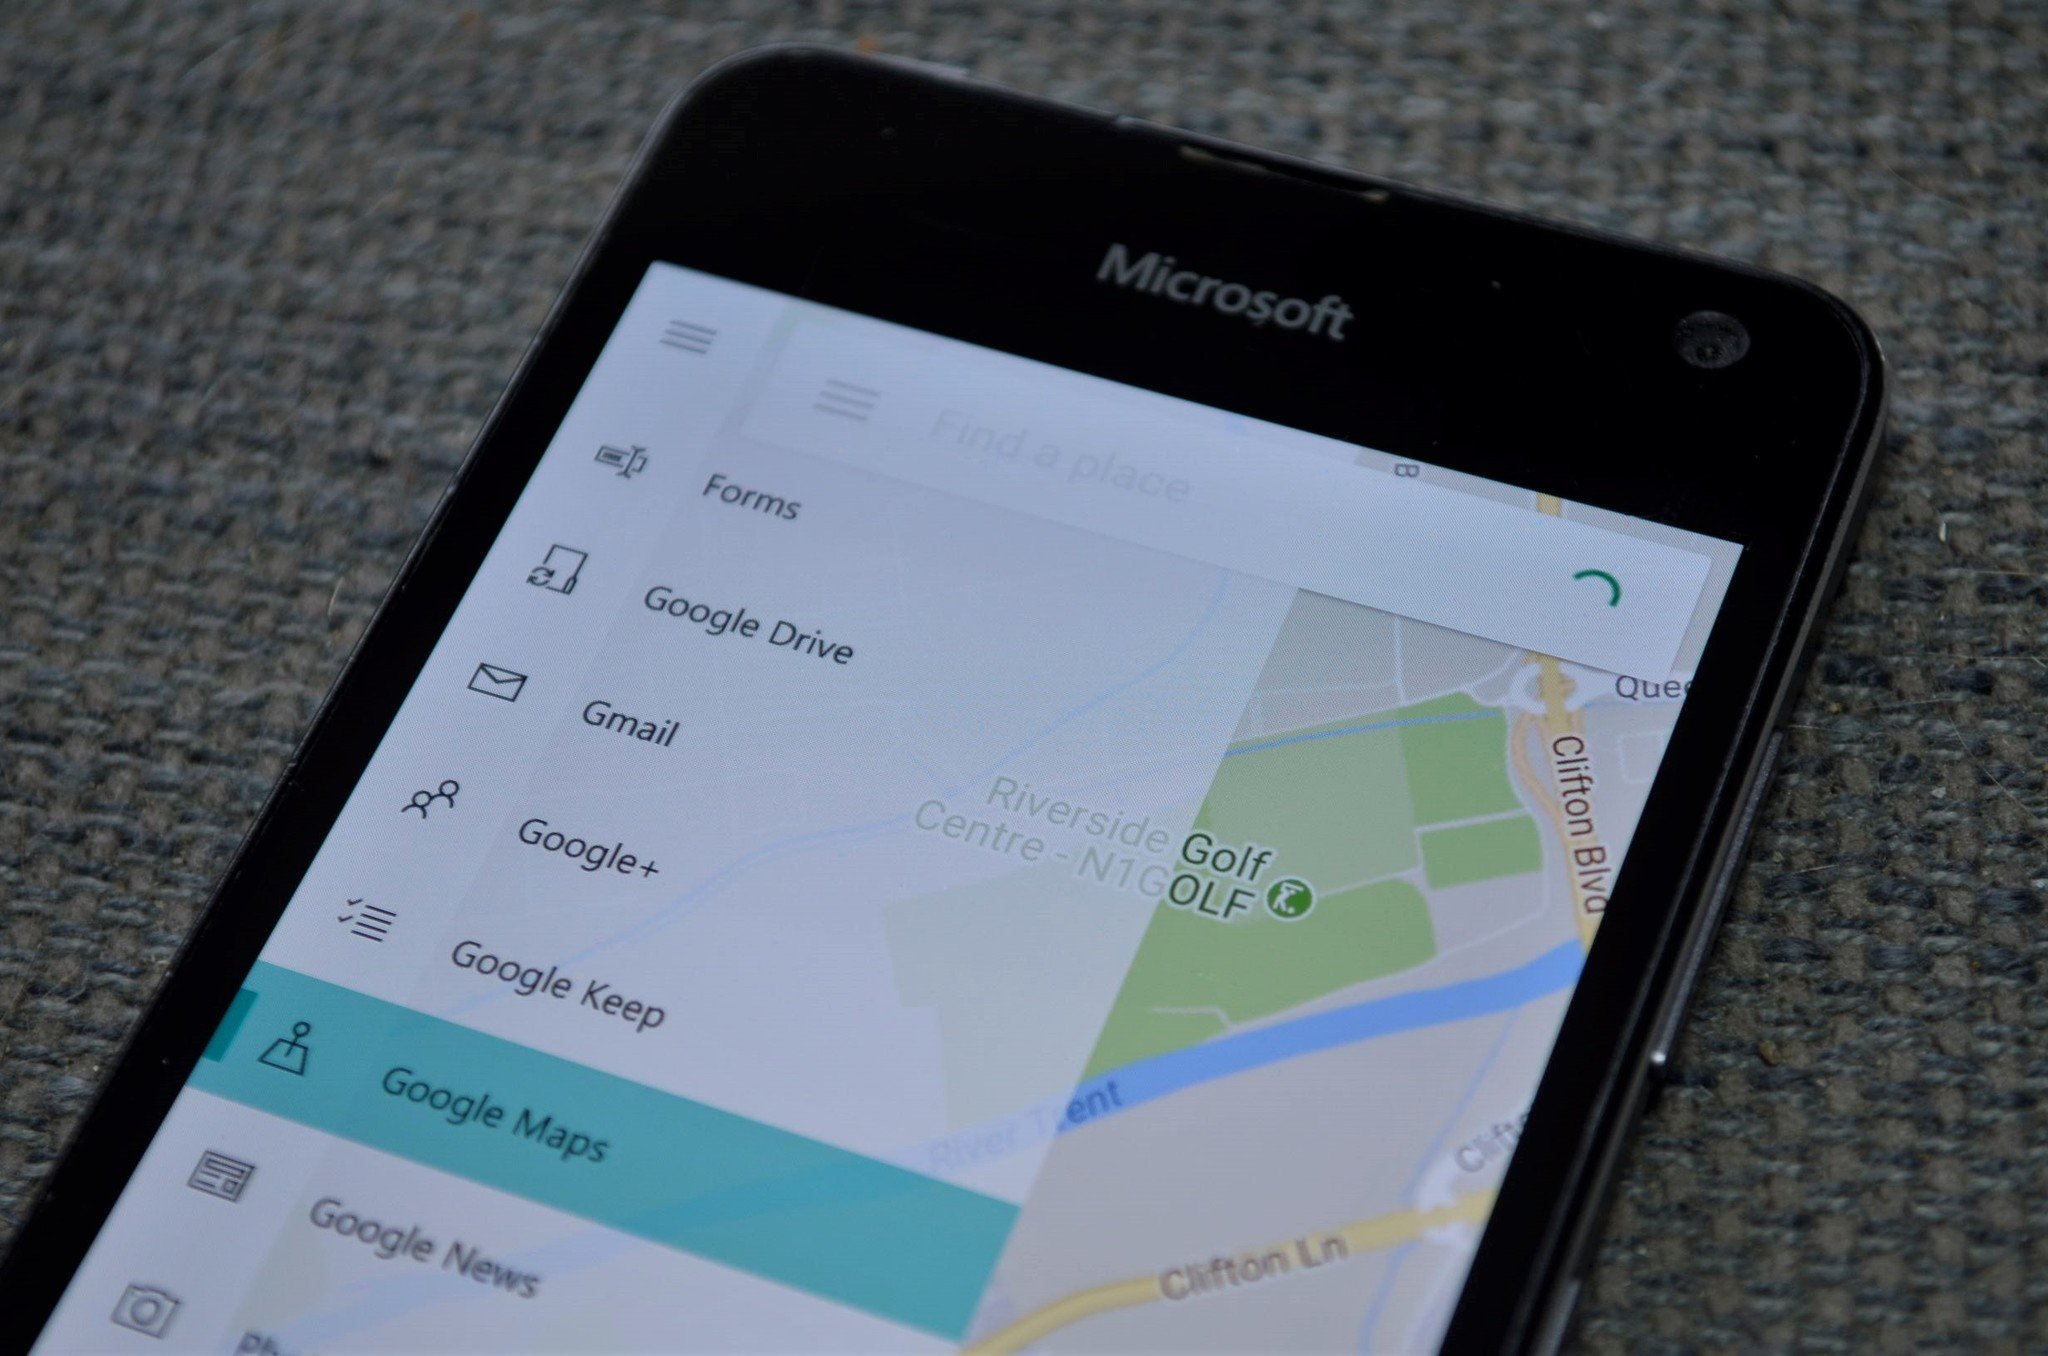 does windows phone have google maps